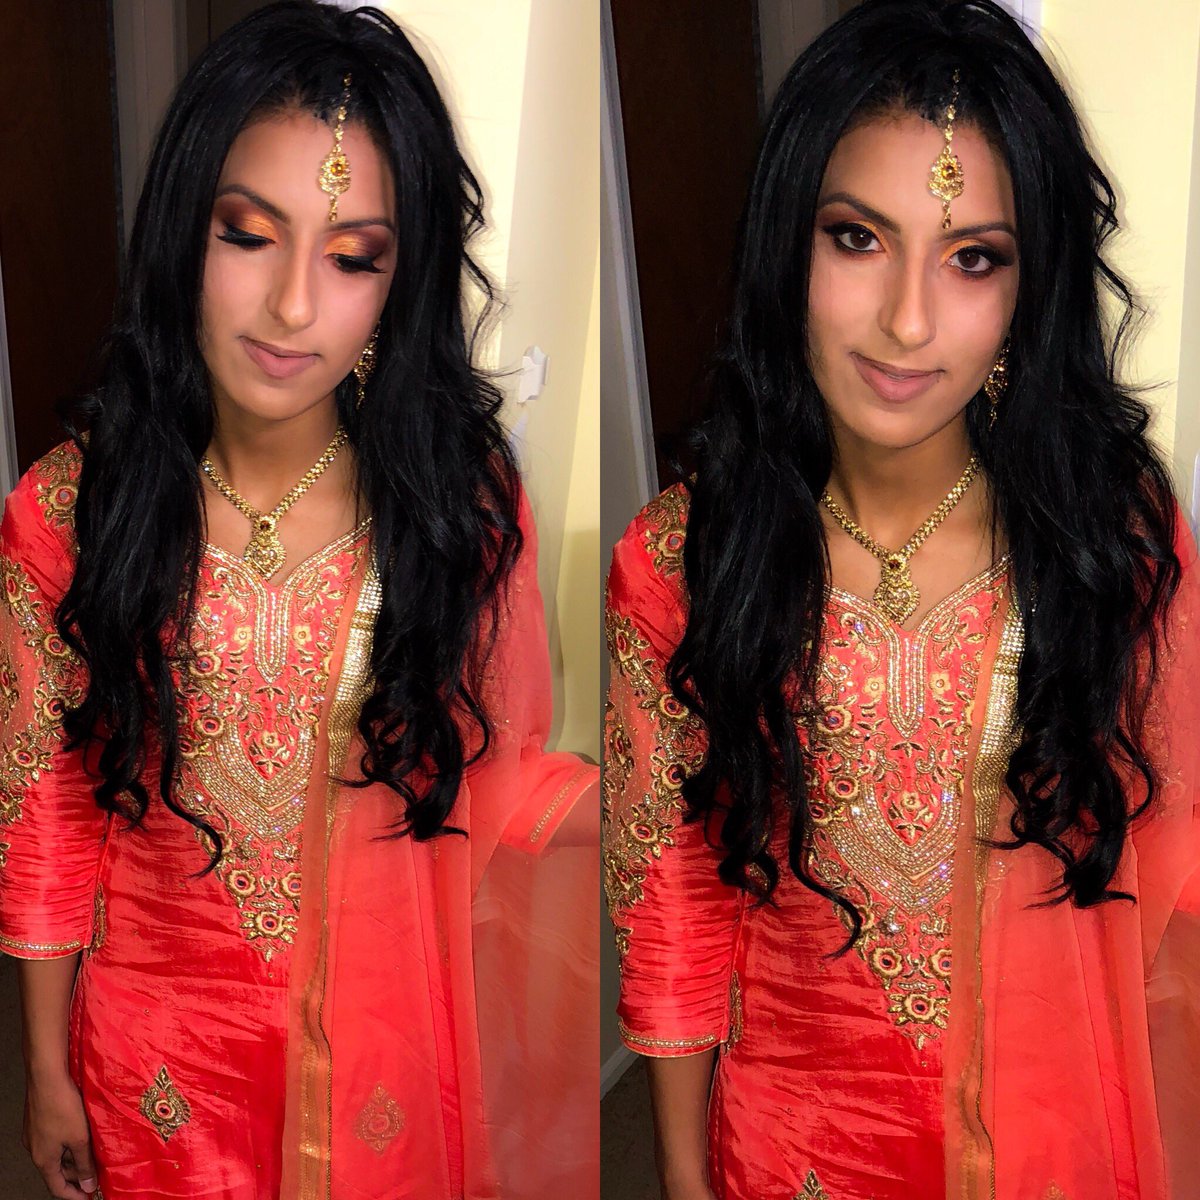 This makeup was by far my fav to do 😍😍😍😍 #indianwedding #indianmakeup #indianglam